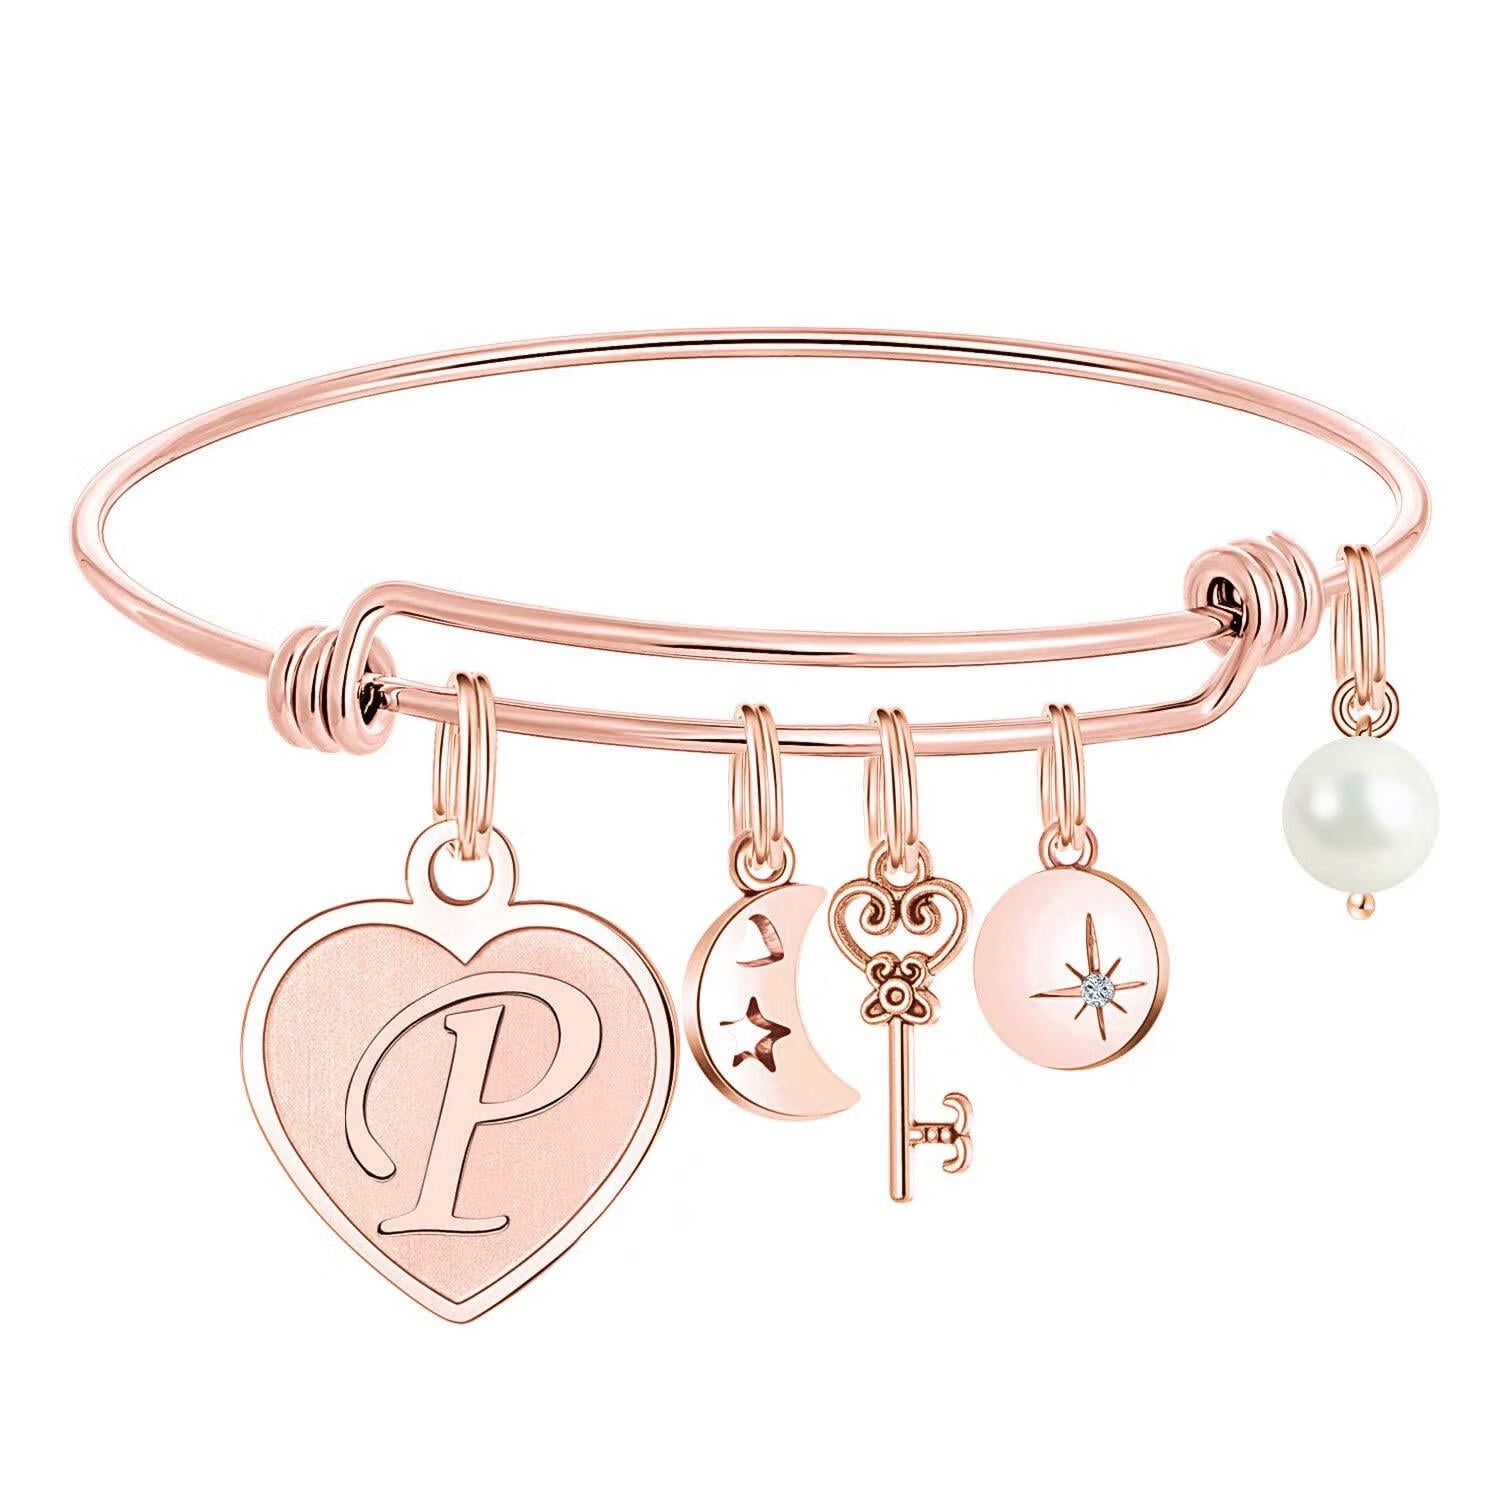 Bangle Gold Hoops Charms Jewelry Designers Valentines Day Gift 18K Gold  Plated Bracelet With Picture Inside Charm Bracelet Making Kit For Girls  Bracelet For Couples From Fashion9193, $13.39